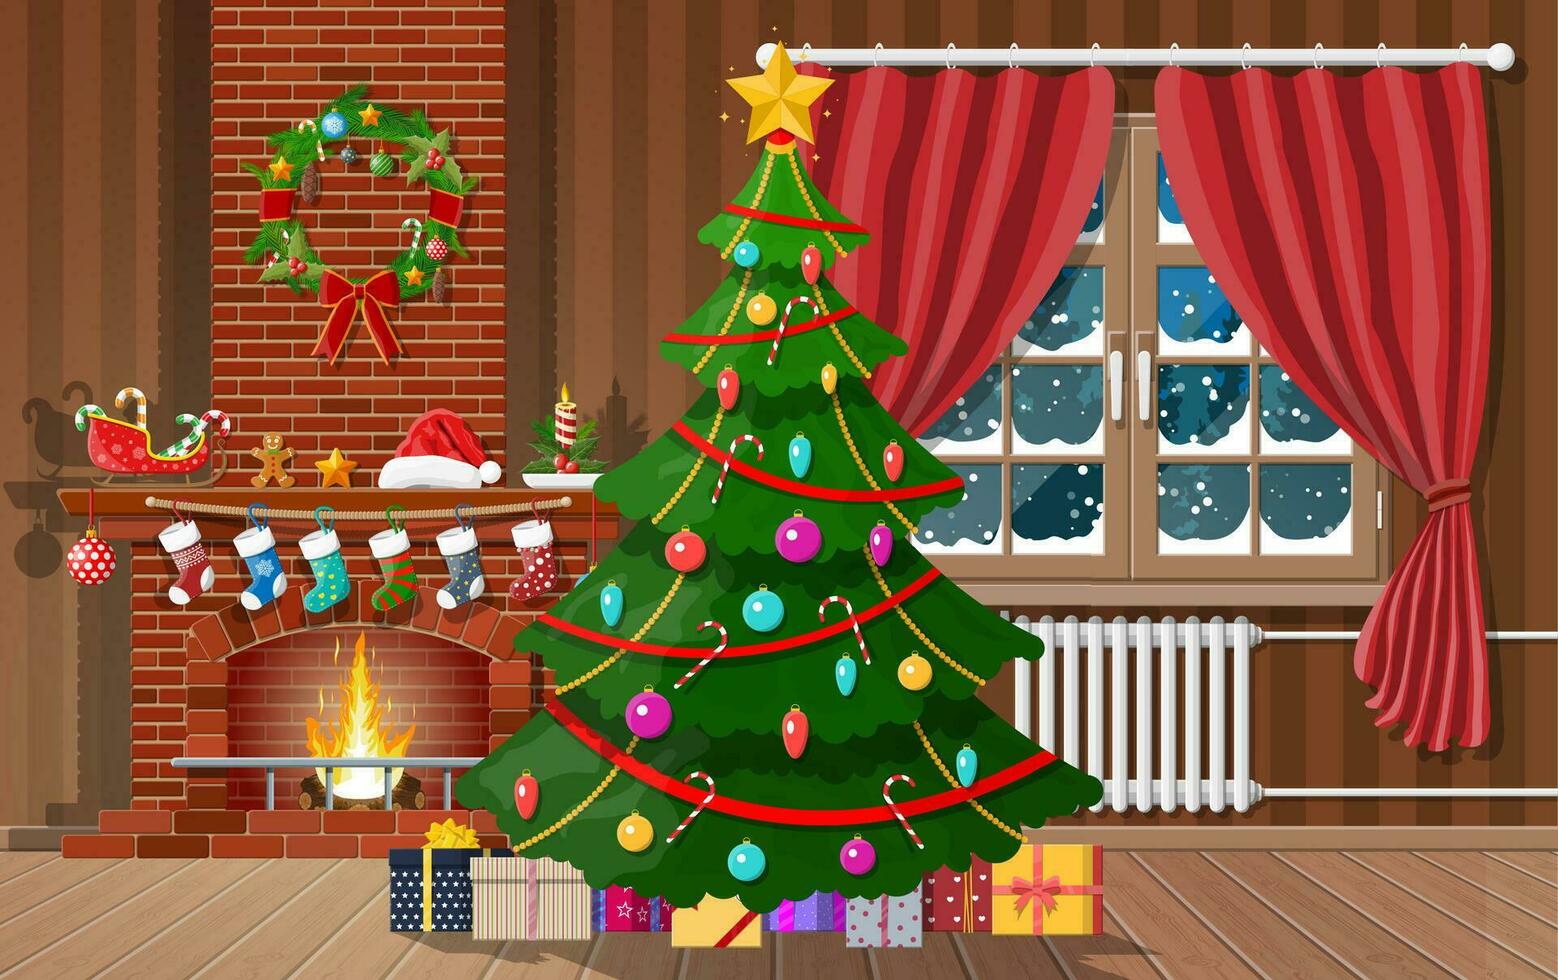 Christmas interior of room with tree, window, gifts and decorated fireplace. Happy new year decoration. Merry christmas holiday. New year and xmas celebration. Vector illustration flat style